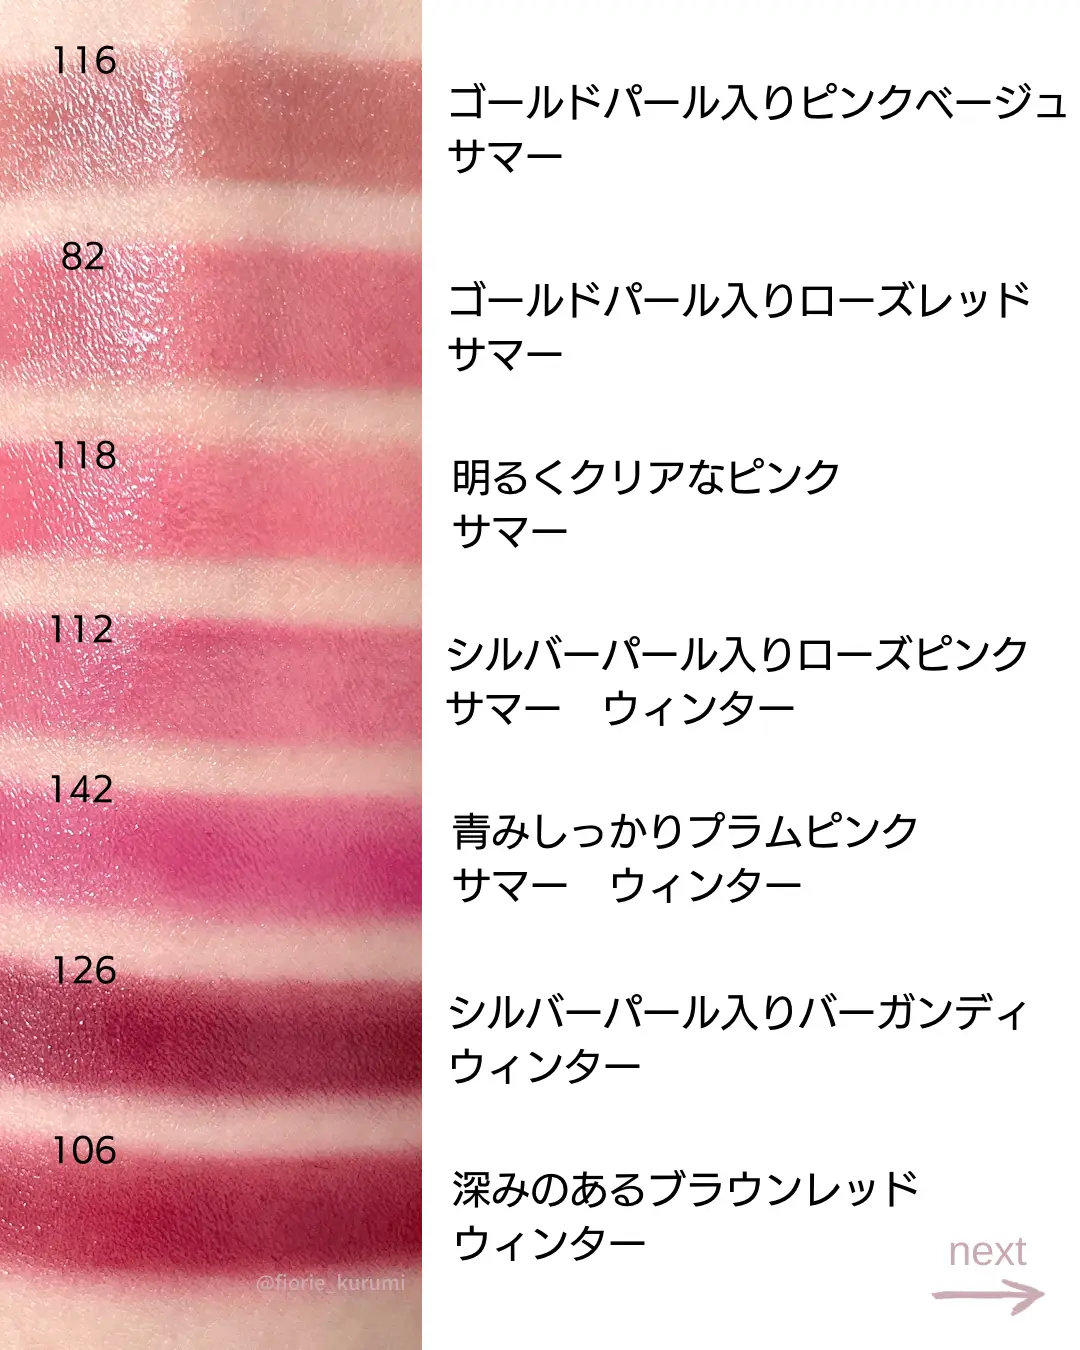 CHANEL ROUGE COCO FLASH 7 | Gallery posted by ［柏］kurumi